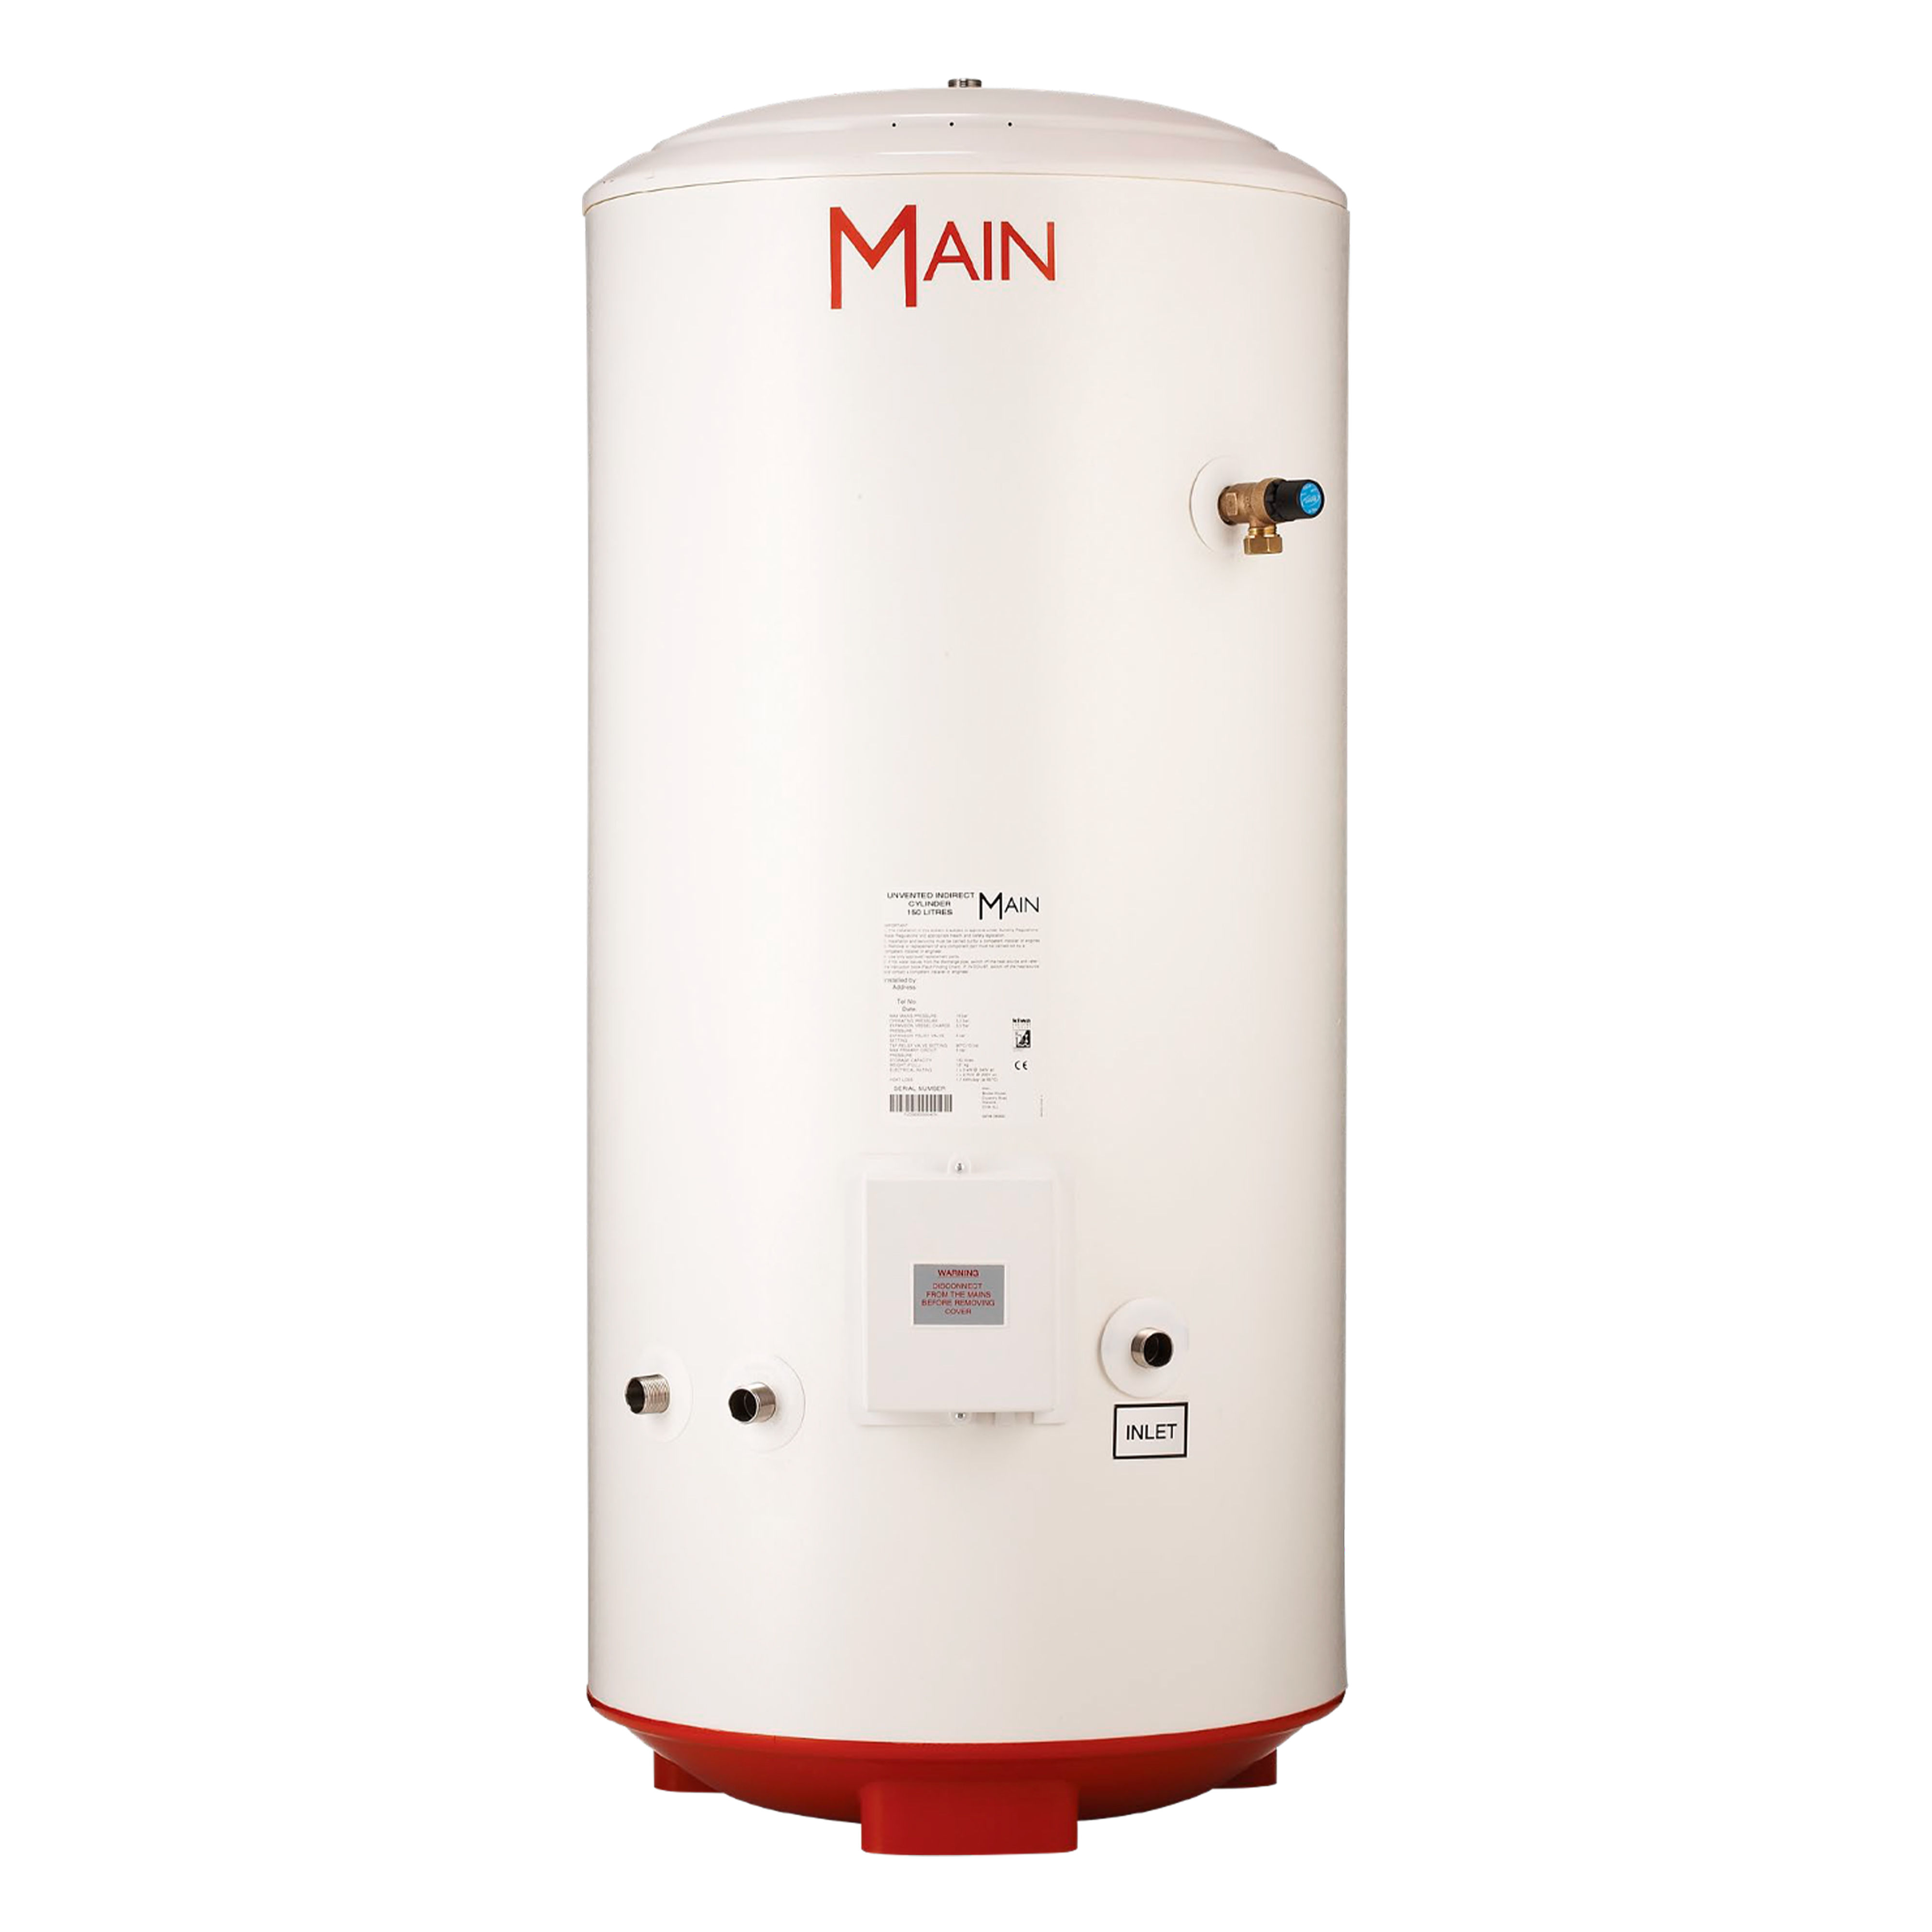 Main Stainless Steel Unvented Indirect Hot Water Cylinder